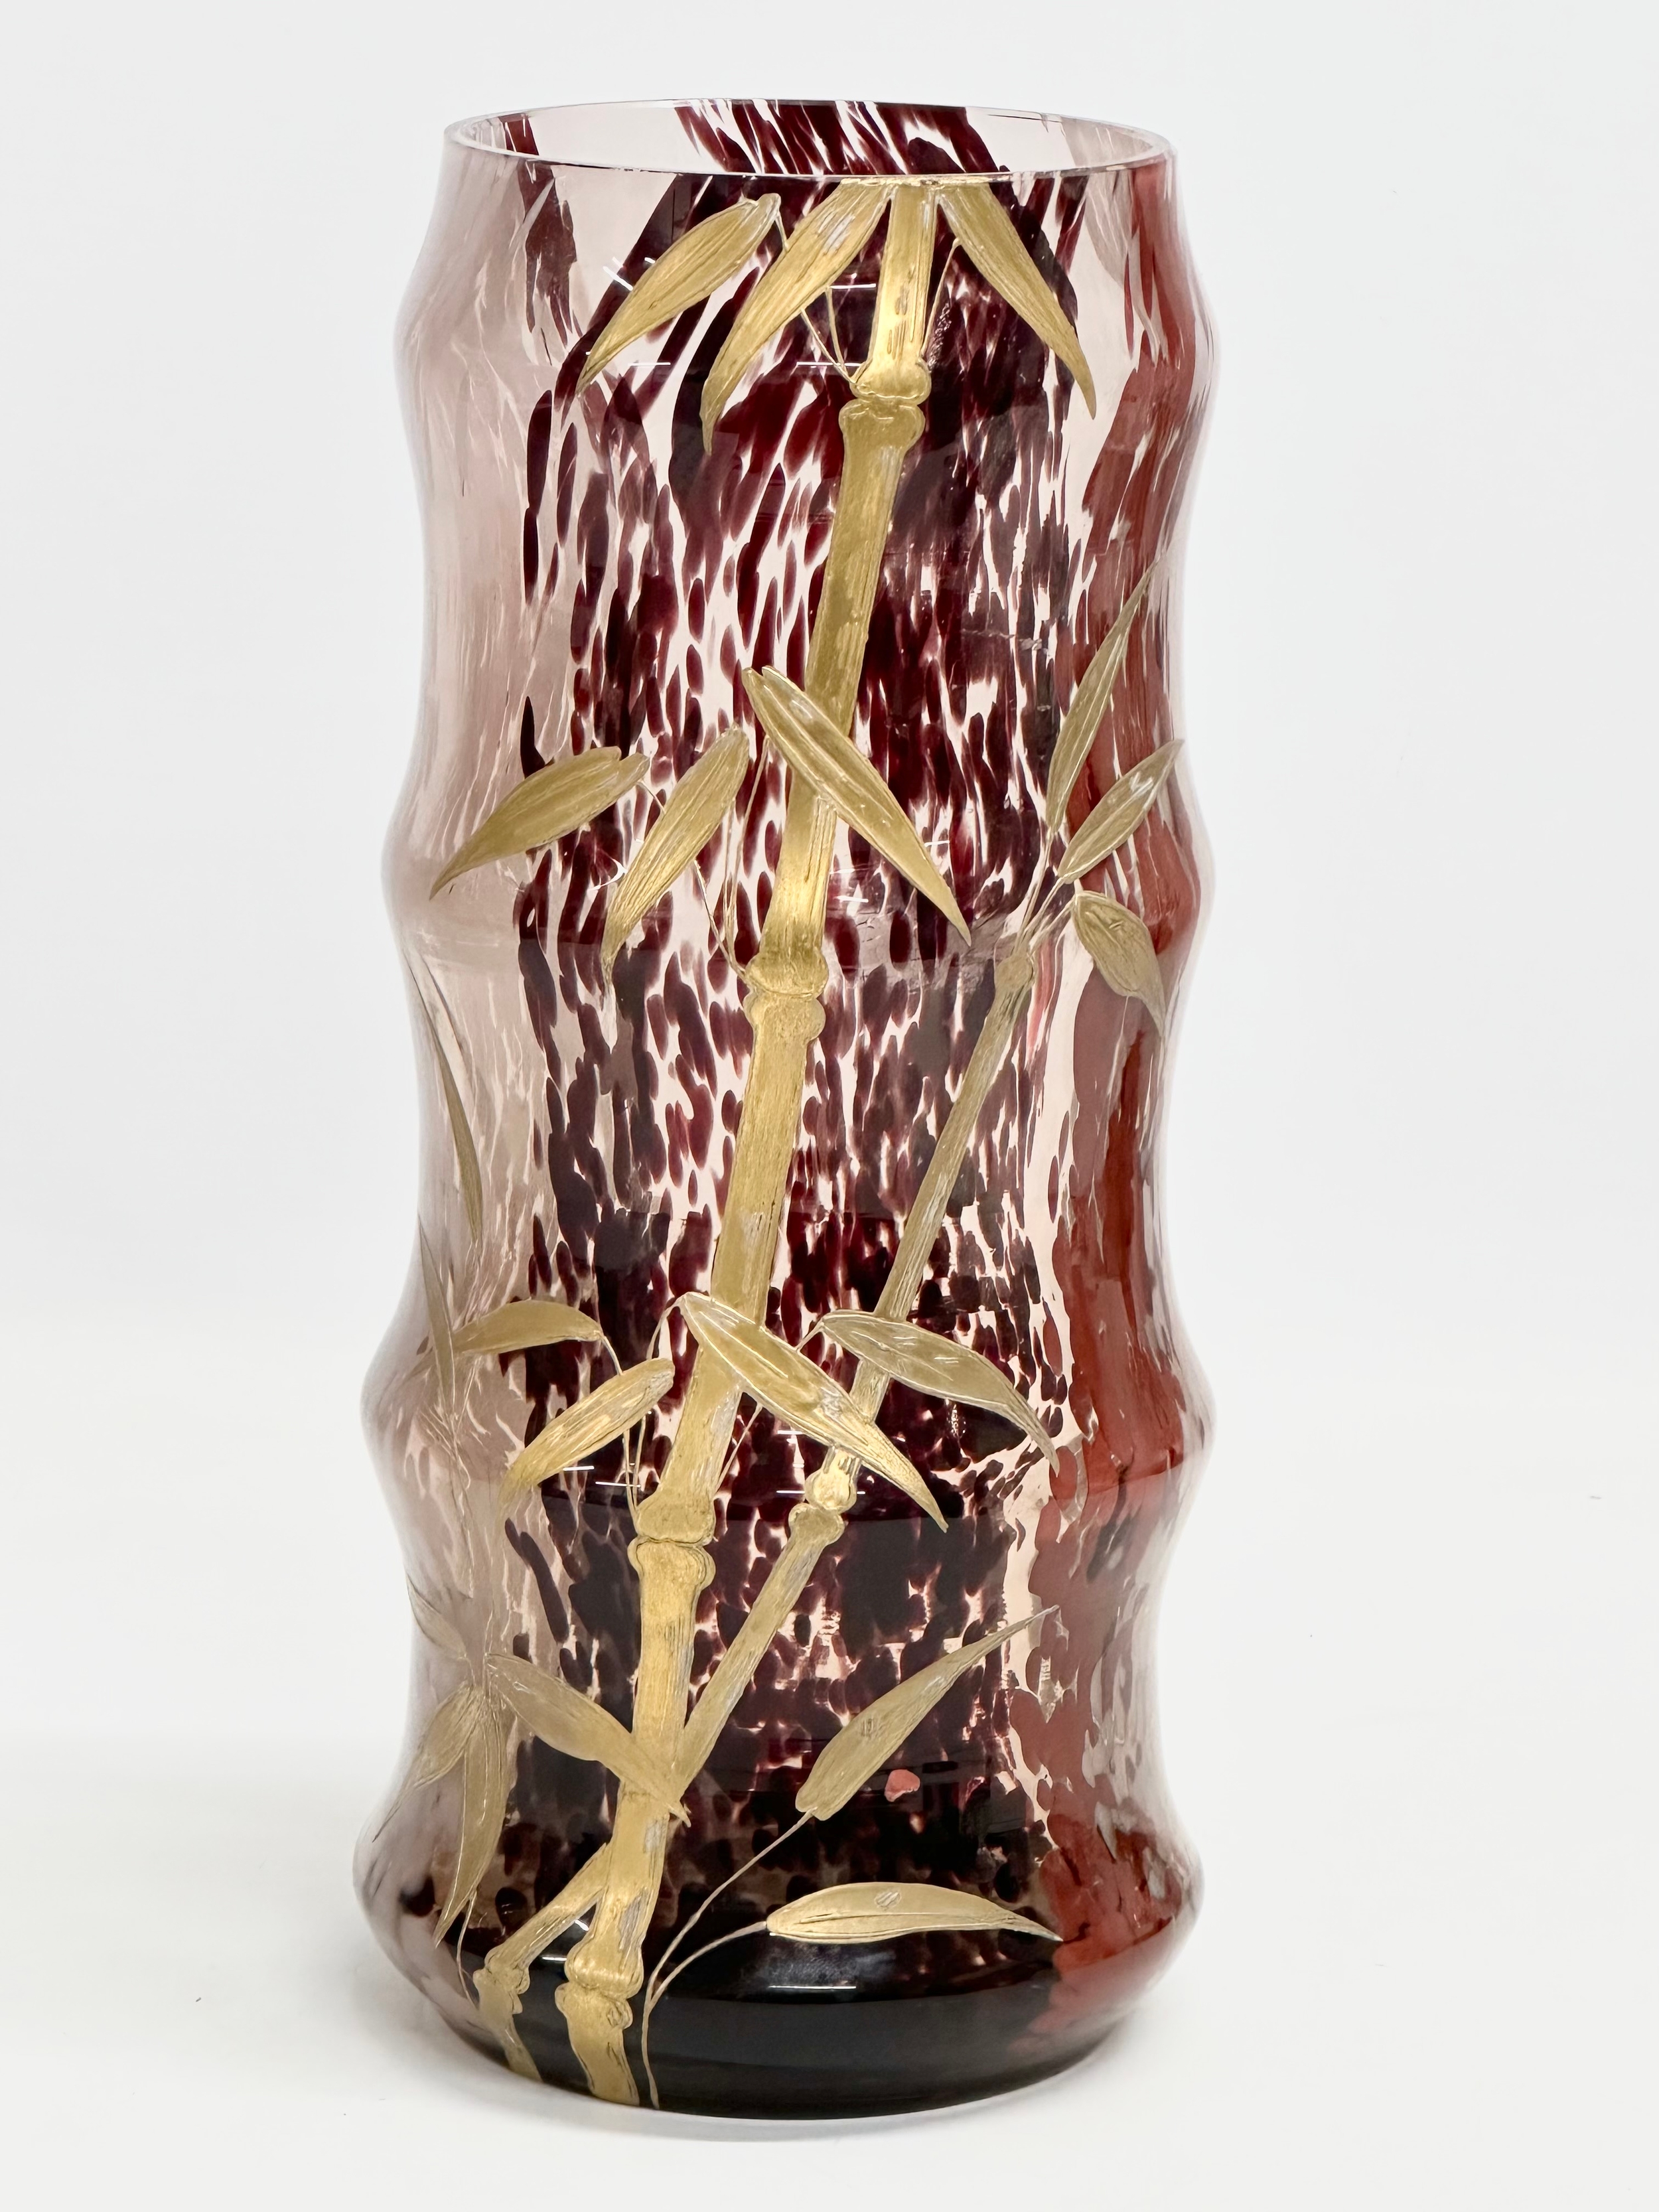 A rare Art Nouveau ‘Bamboo’ glass vase by Ernest Baptiste Leveille. Early 20th century. Circa